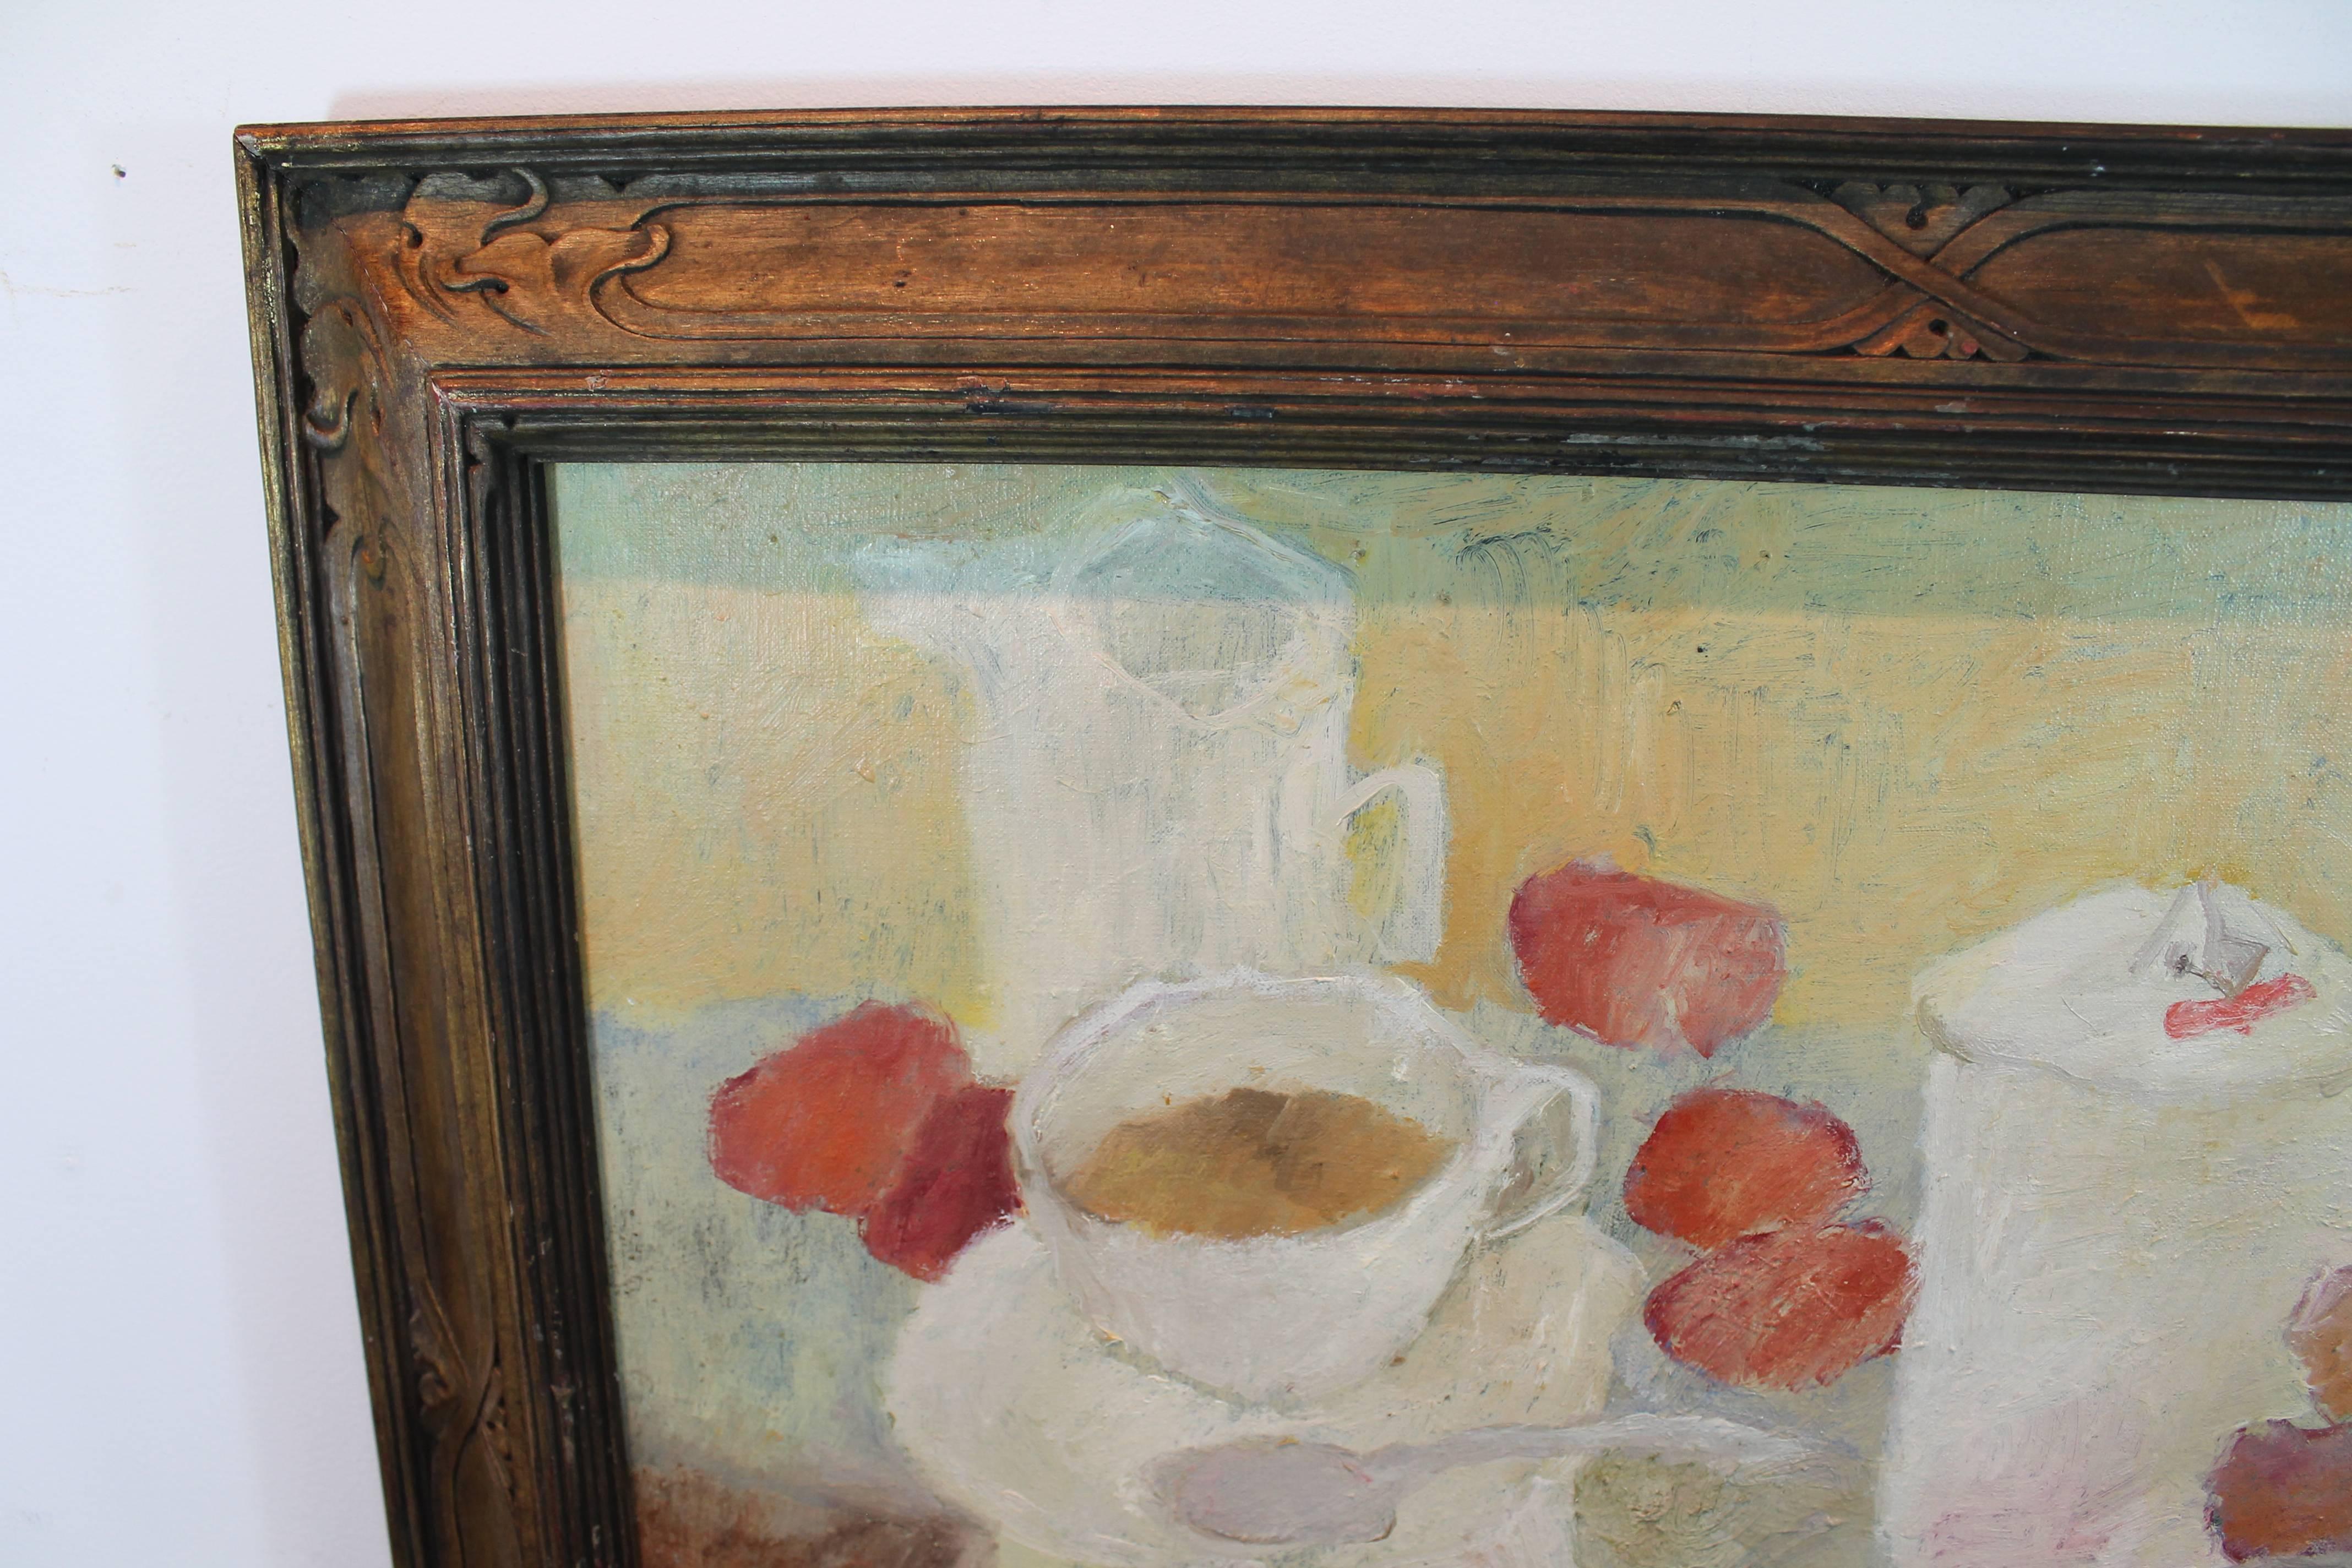 Wonderful palette on this oil on canvas of a still life.
Signed en verso Perry. This painting was acquired with several other from the same artist, some signed Frances Perry and others just Perry, with most dated from the 1960s.
Framed in an Art